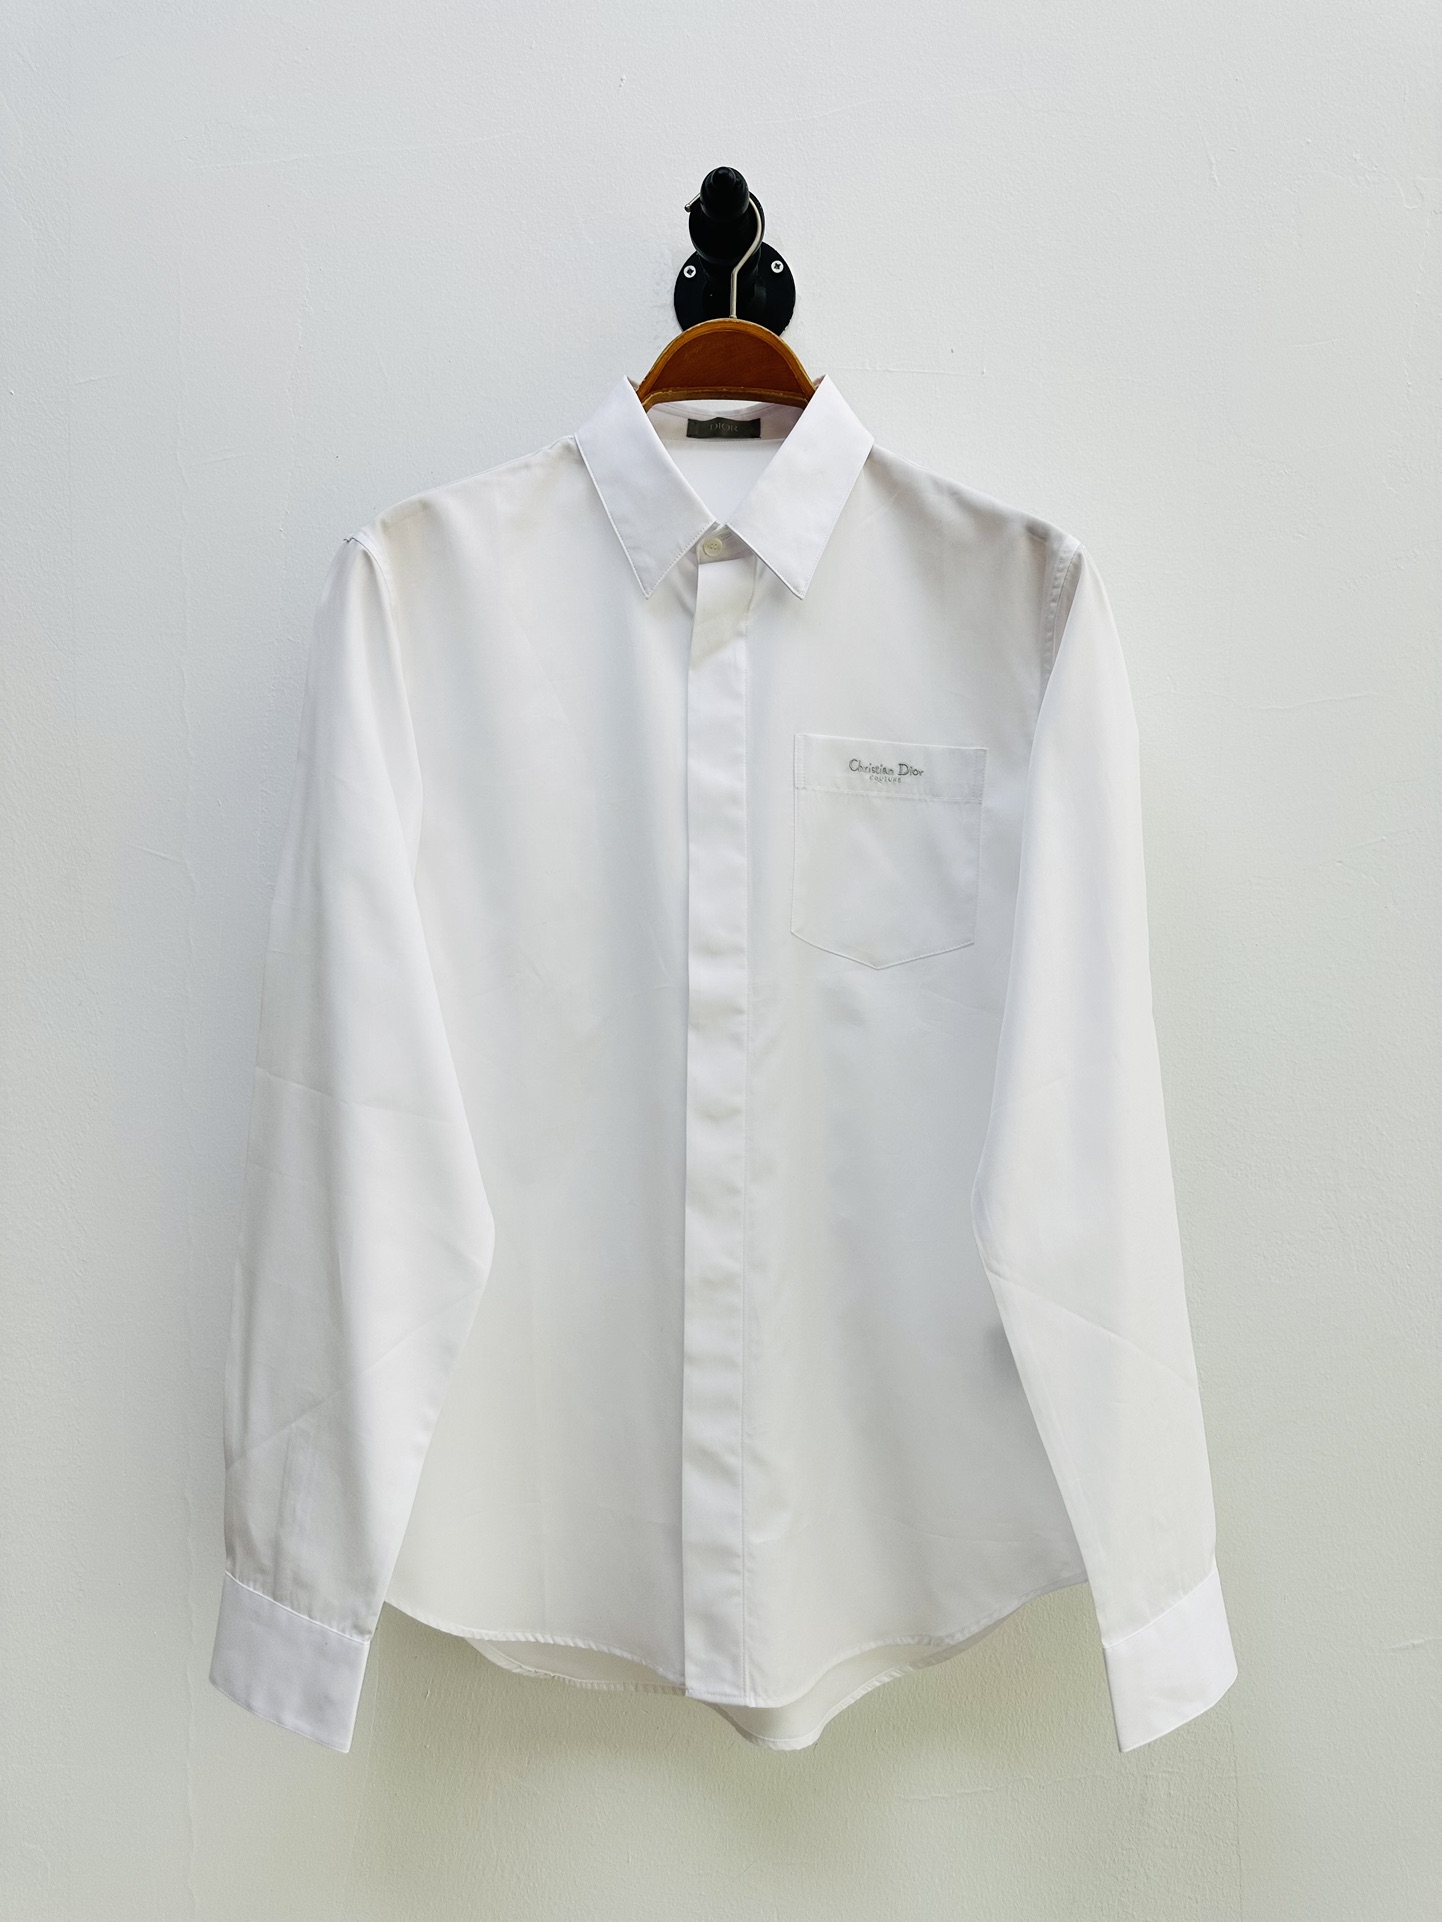 Dior Clothing Shirts & Blouses White Embroidery Cotton Poplin Fabric Casual